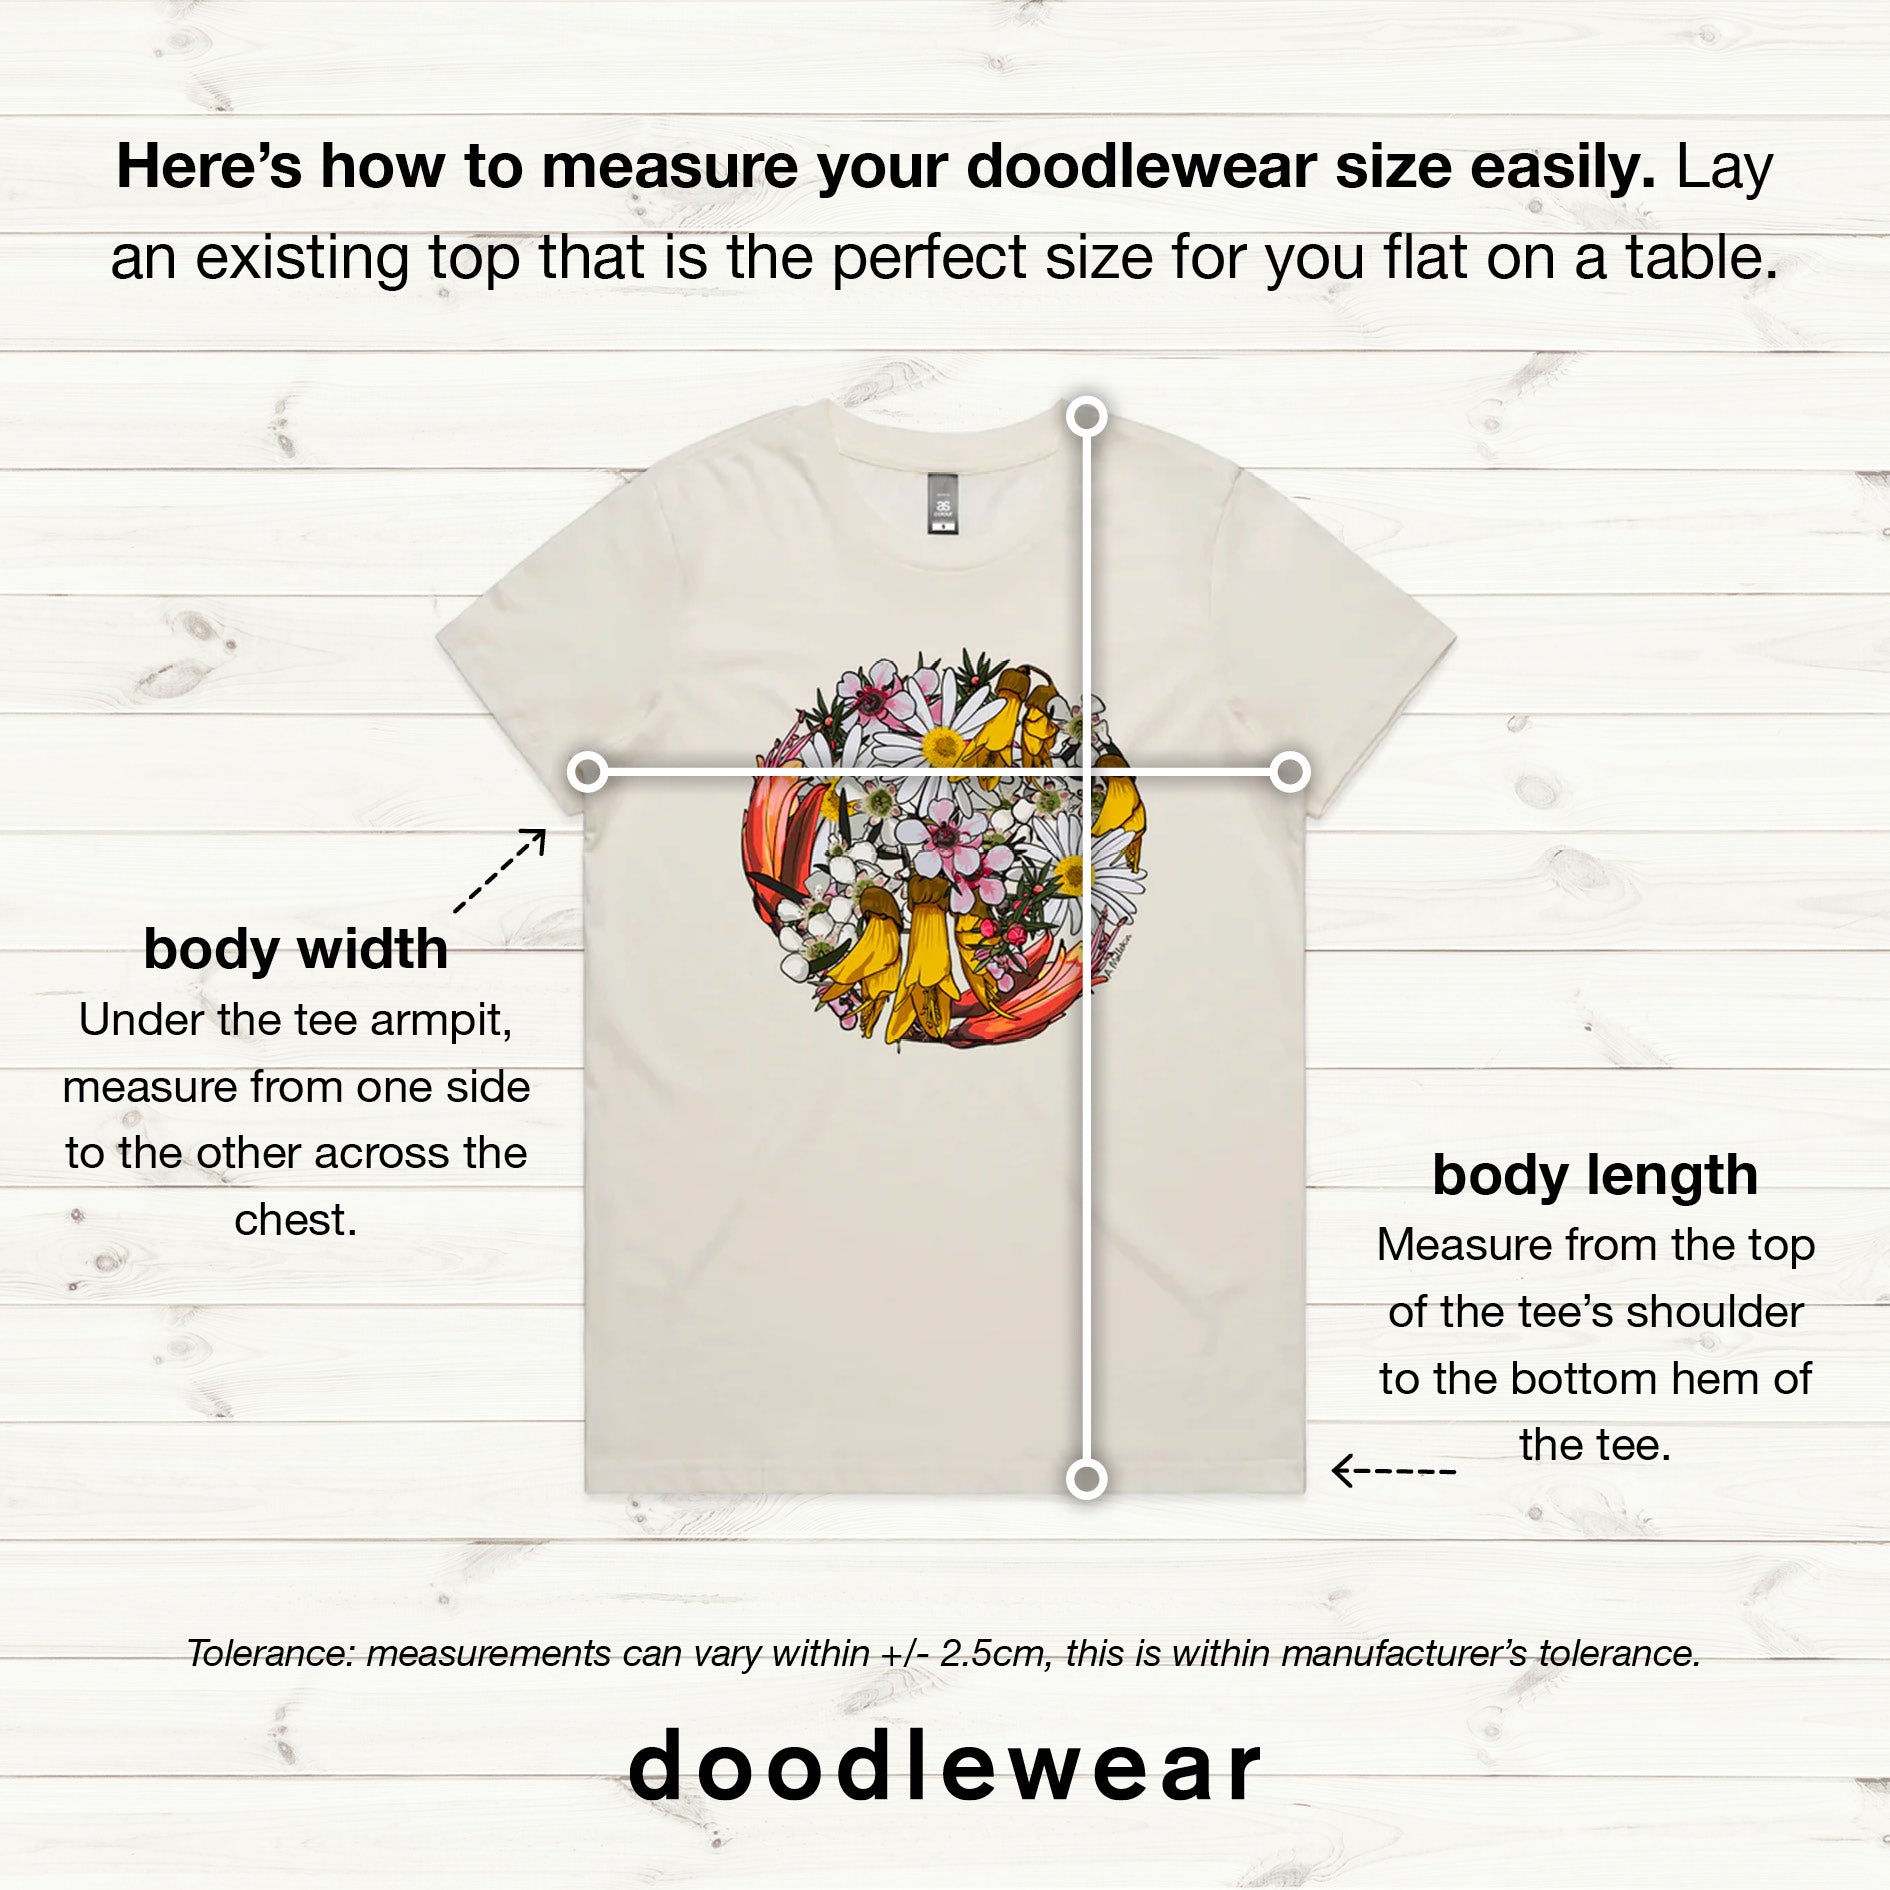 how to measure doodlewear size